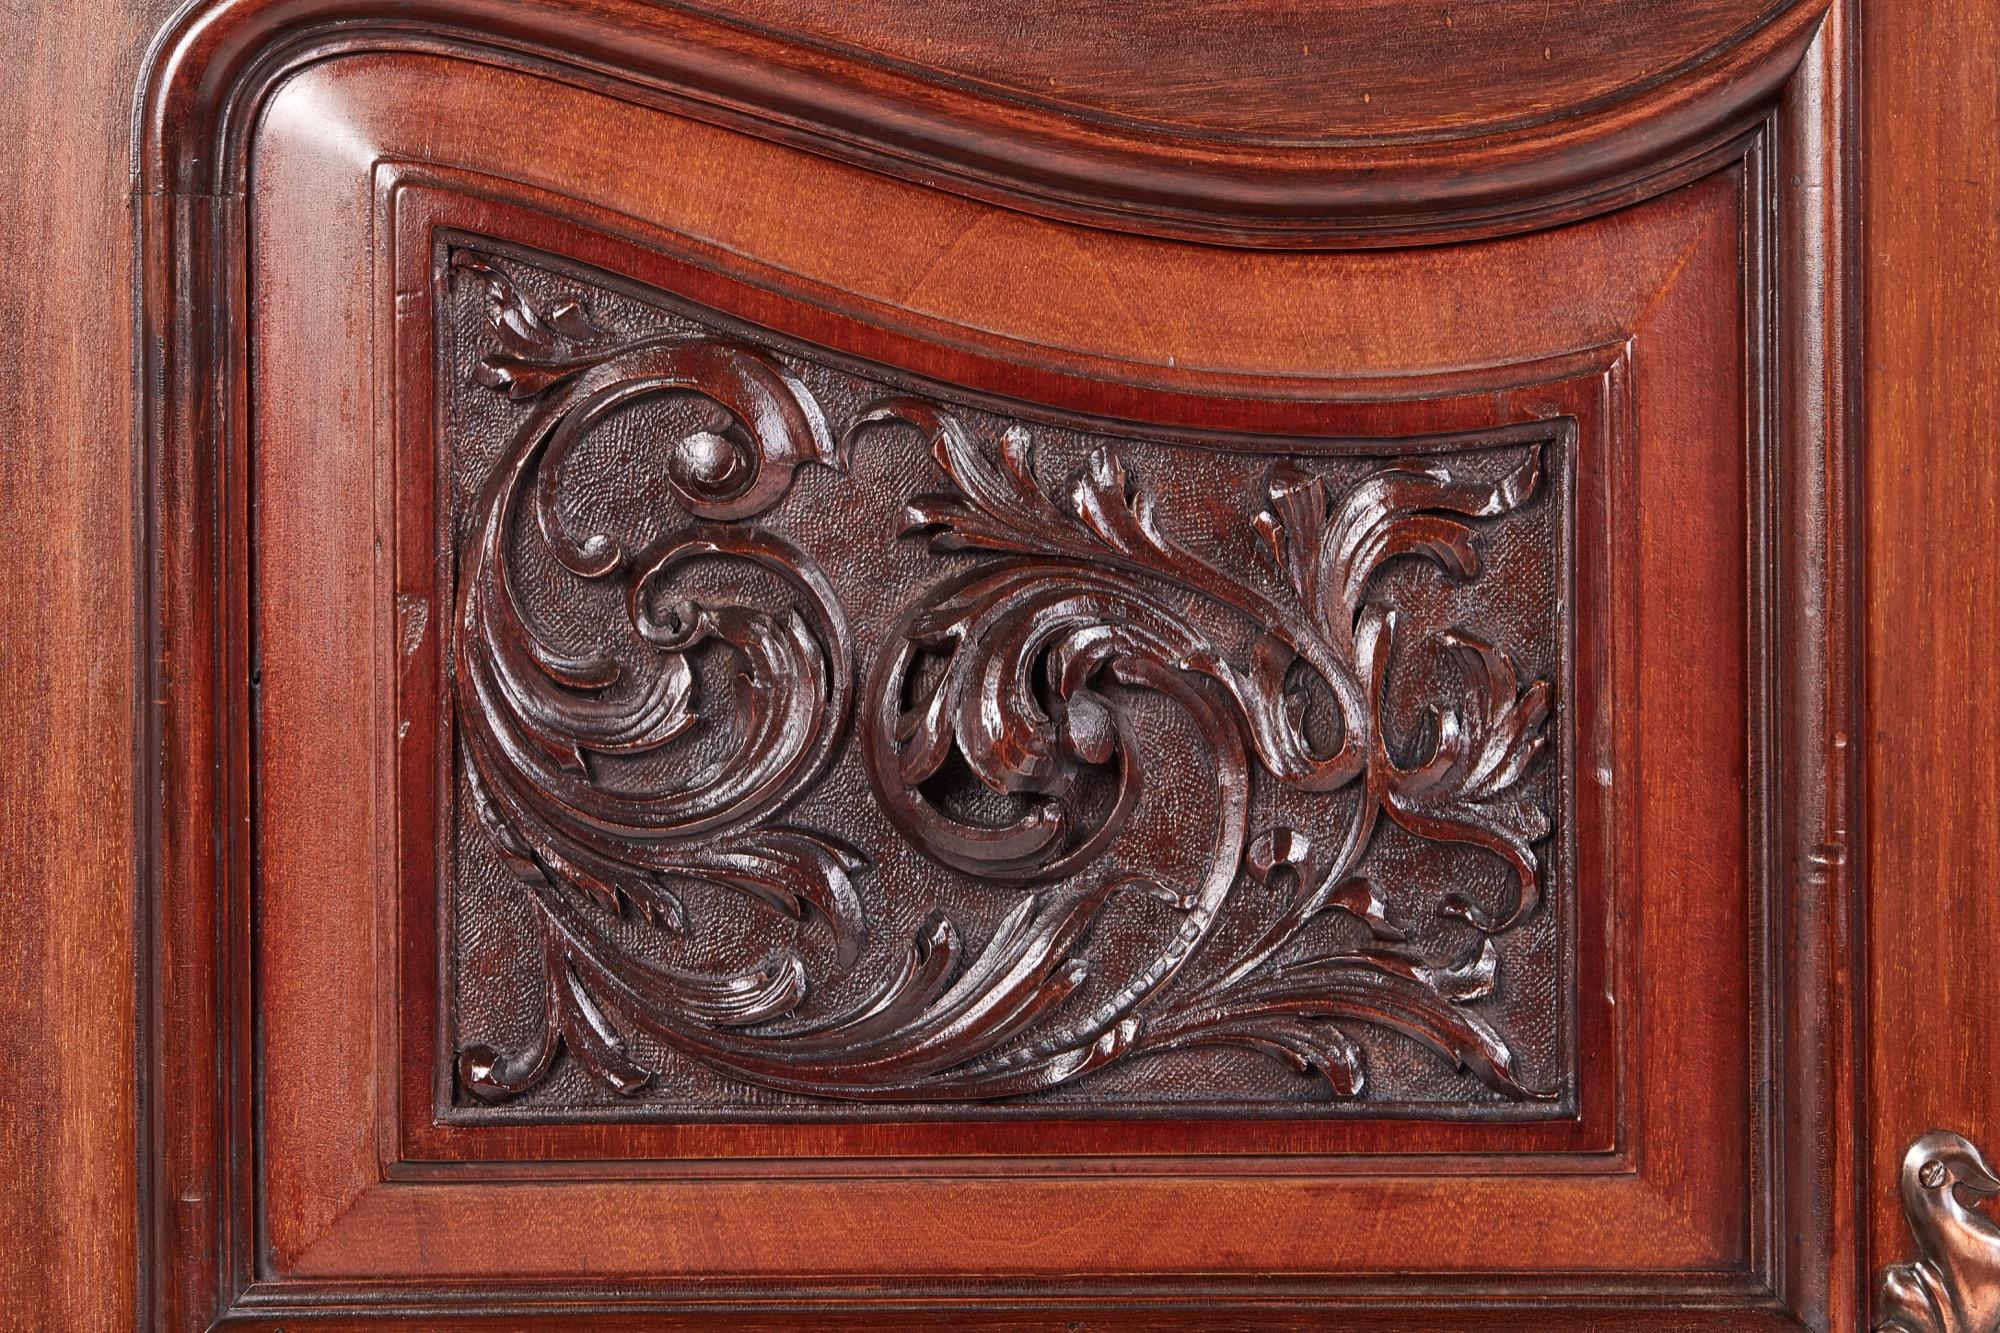 Quality antique carved mahogany sideboard by Maple & Co. The striking base has two central drawers and recessed shelf below flanked by a pair of carved panelled doors which enclose shelves and cellarette. This grand piece is supported on squat